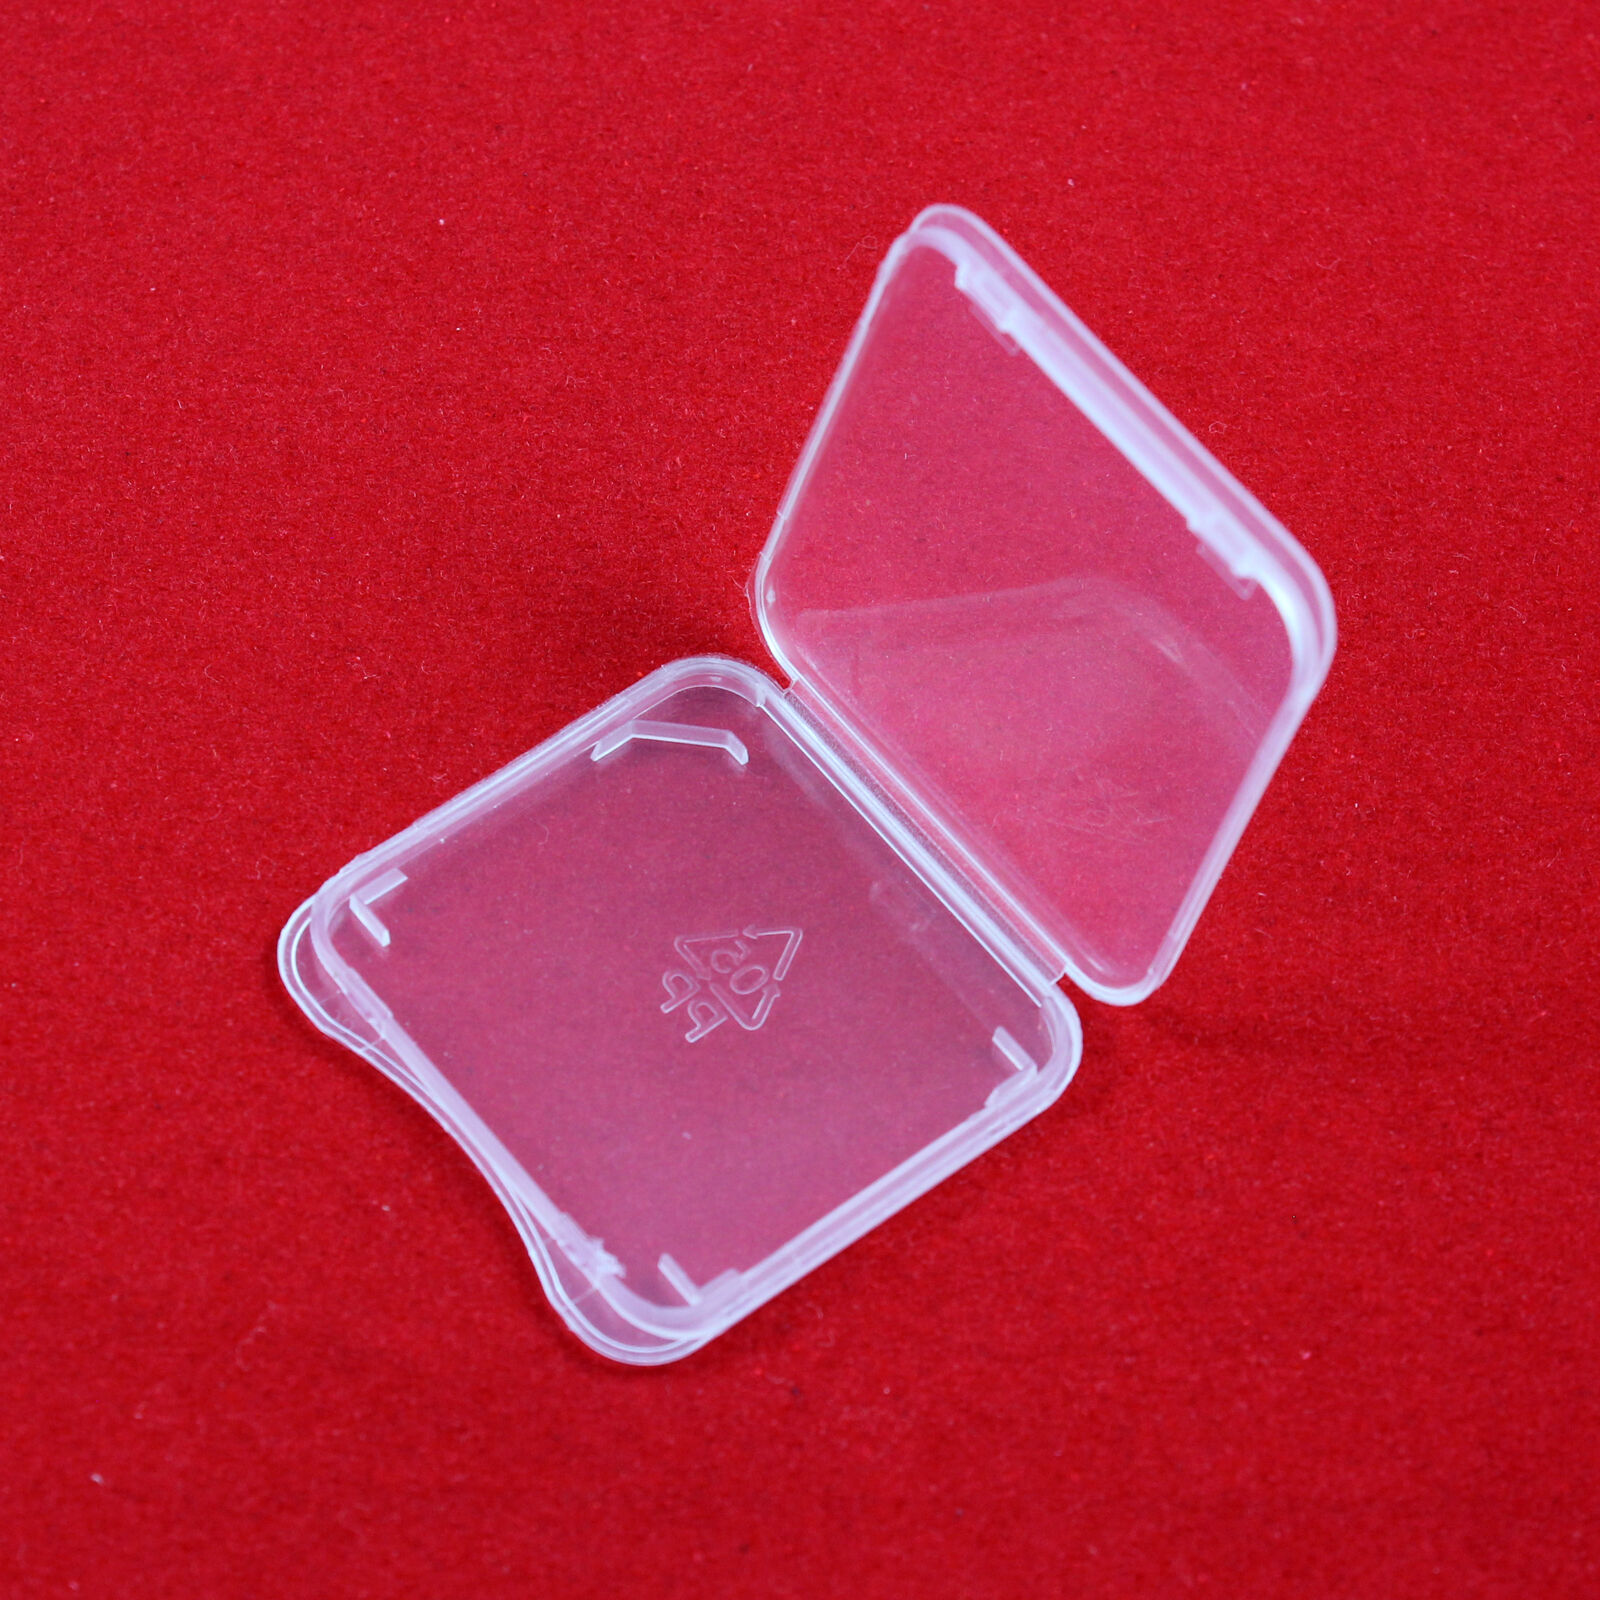 10 Pcs Sd Card Protect Plastic Case Holder,jewel Cases, Sdhc,sdxc Card Case,new